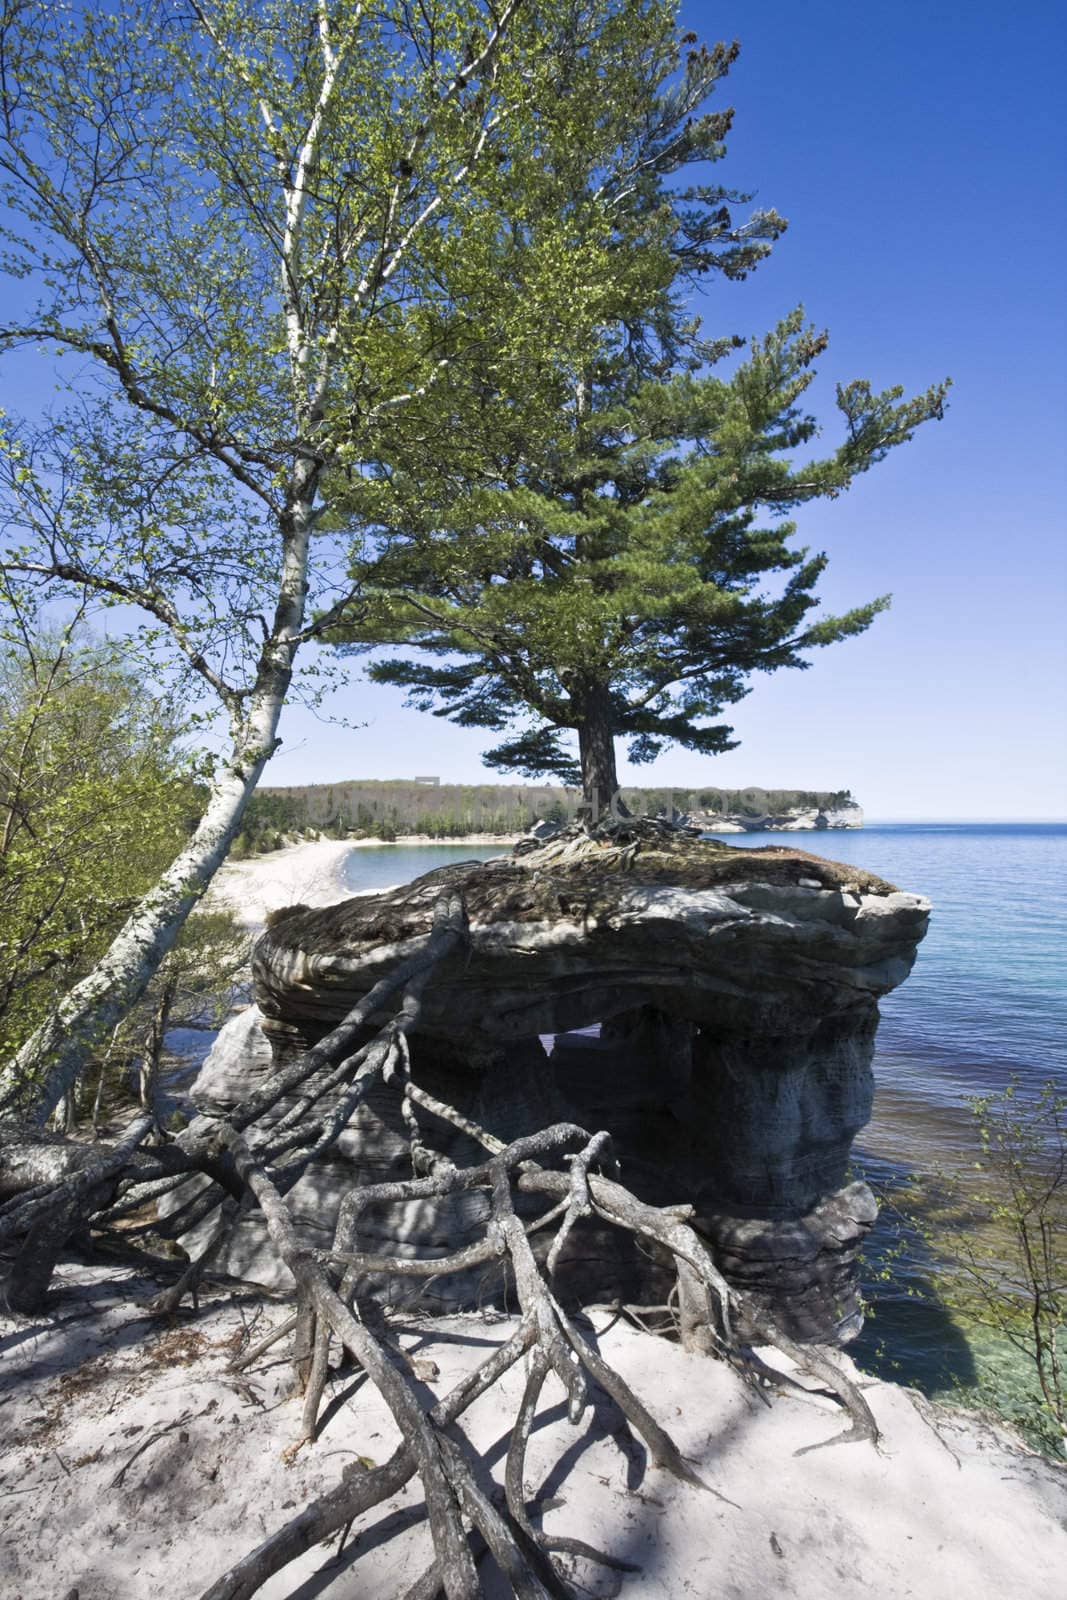 Tree in Pictured Rocks National Lakeshore